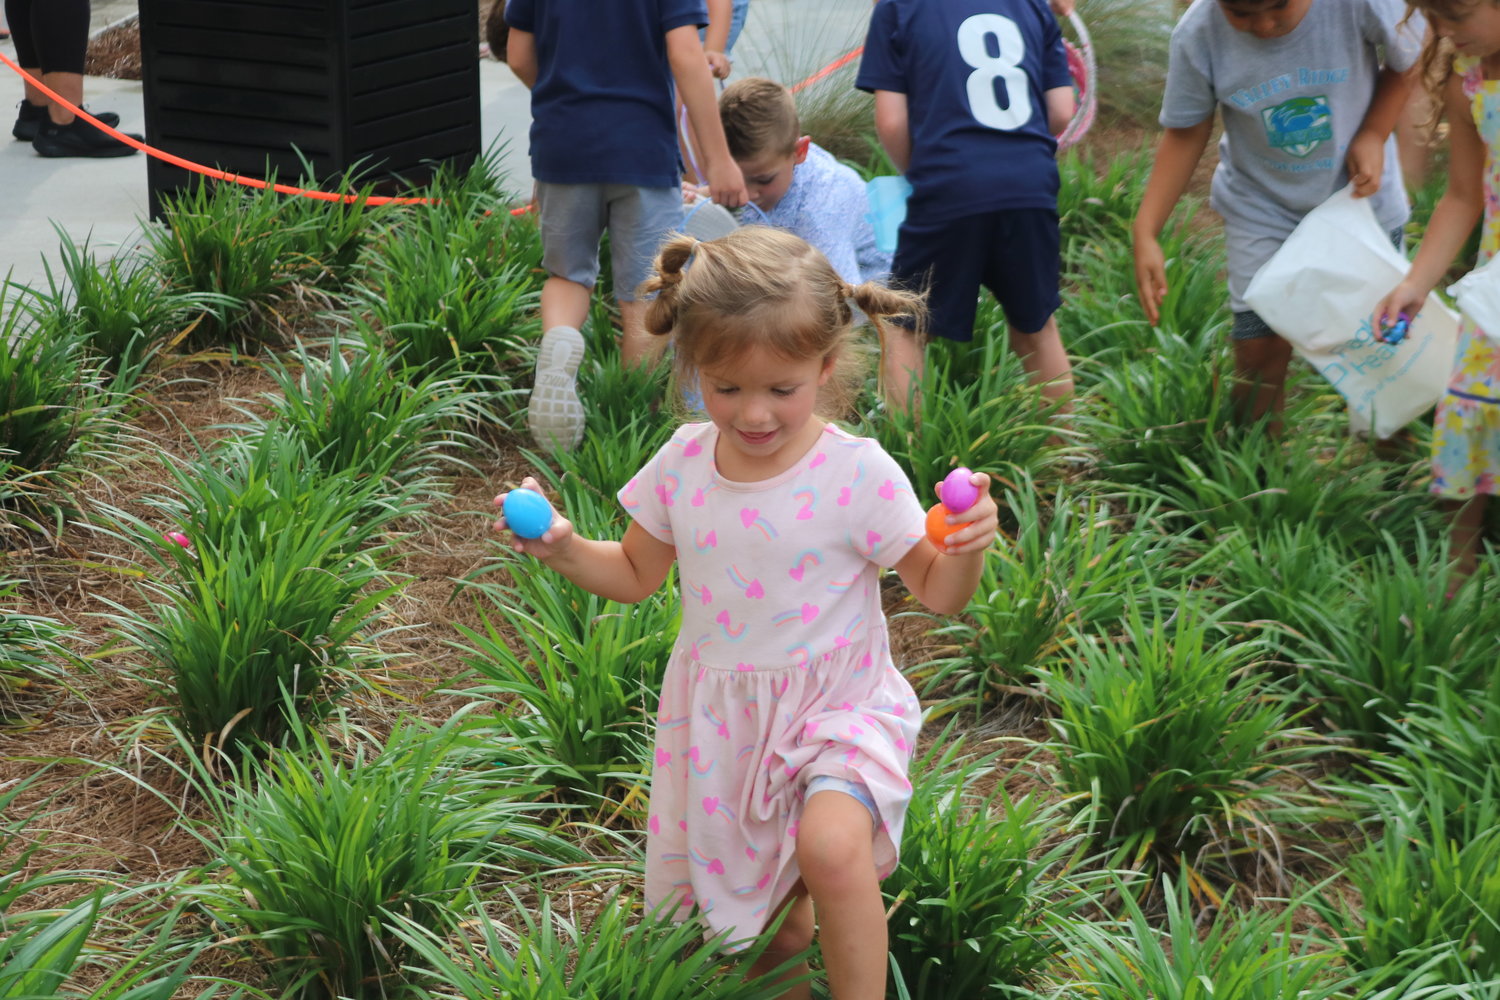 It was the first year that Flagler Health+ Village in Nocatee had hosted the community Easter egg hunt.